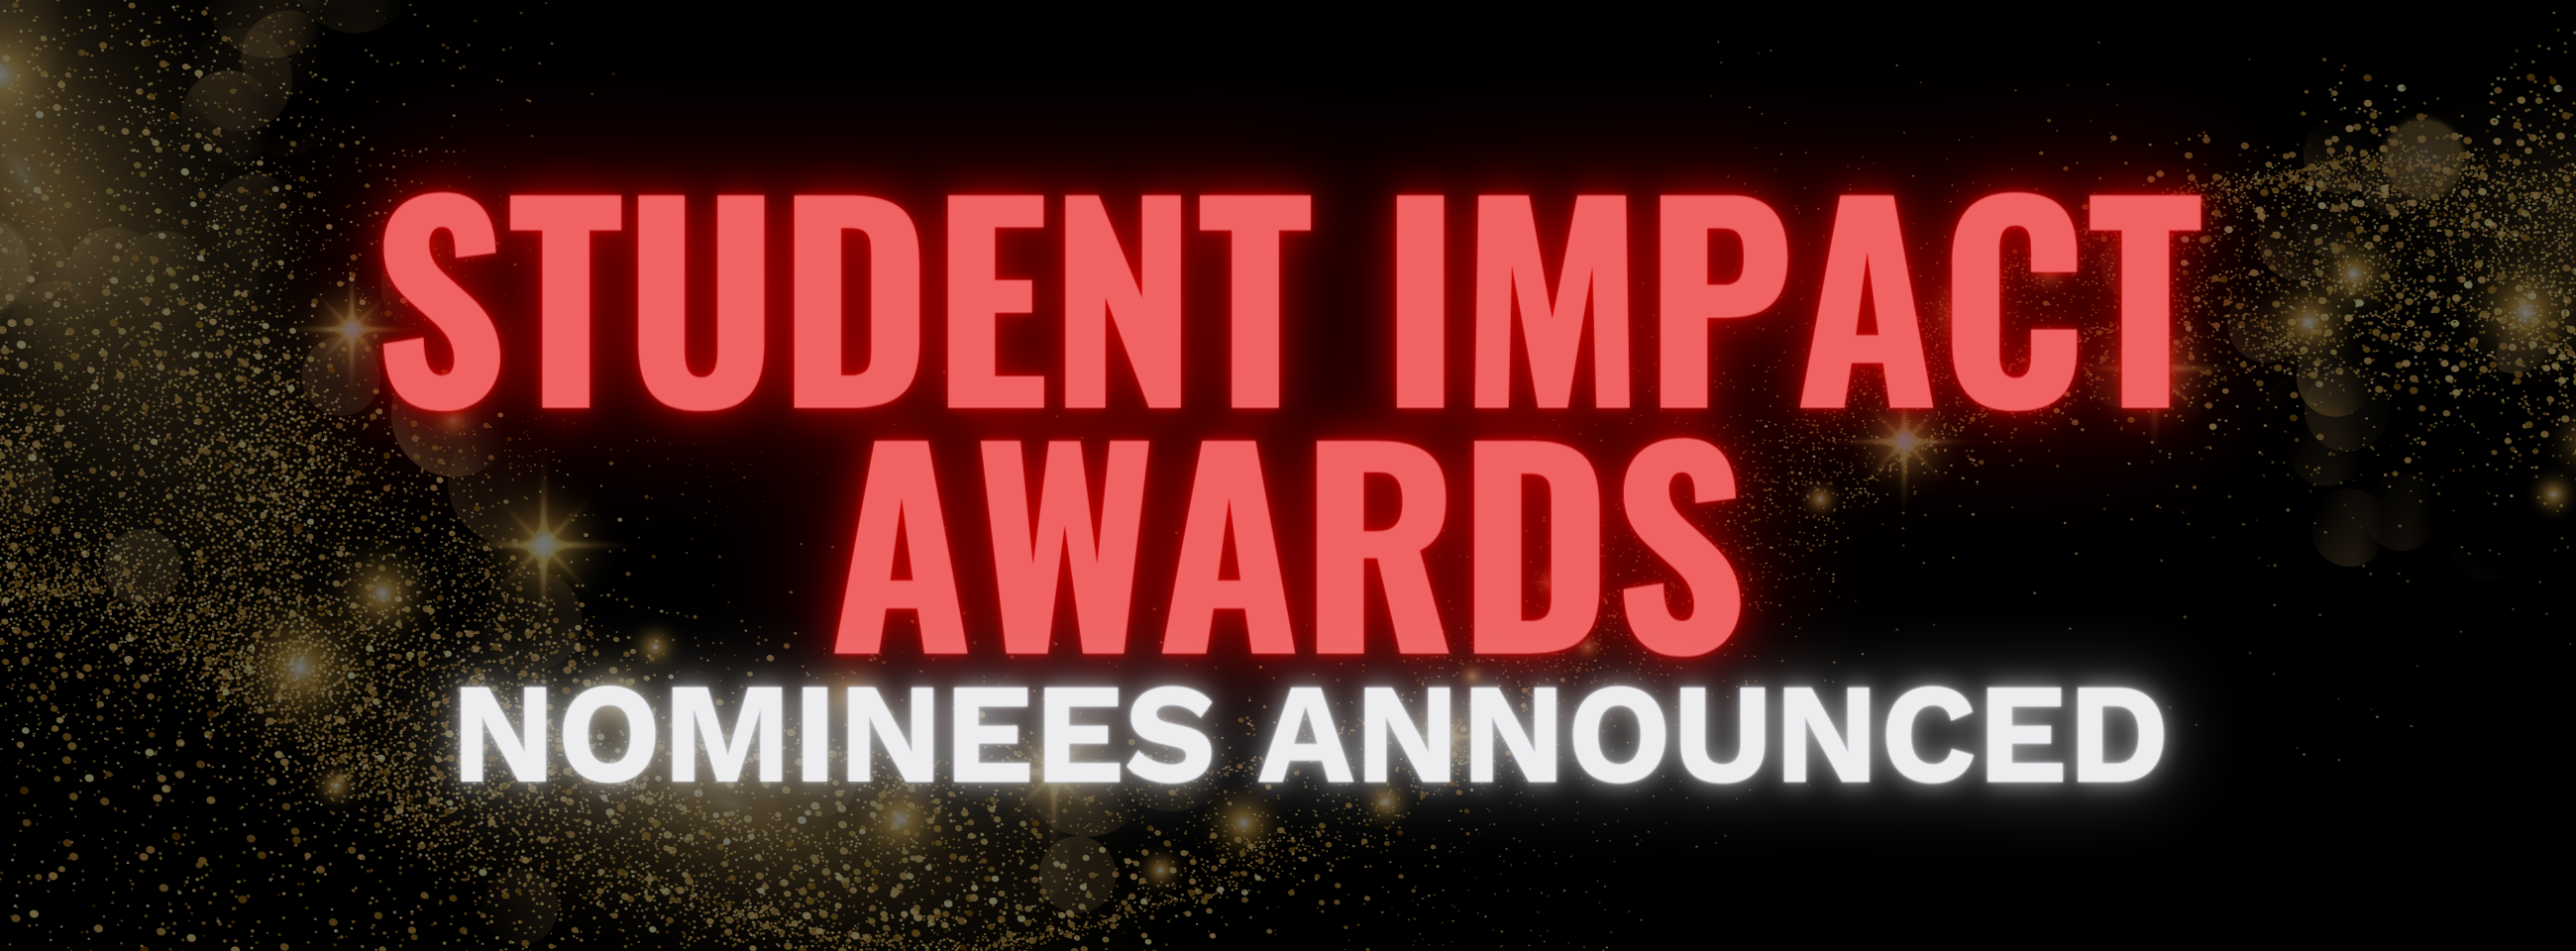 Student Impact Awards Nominees Announced